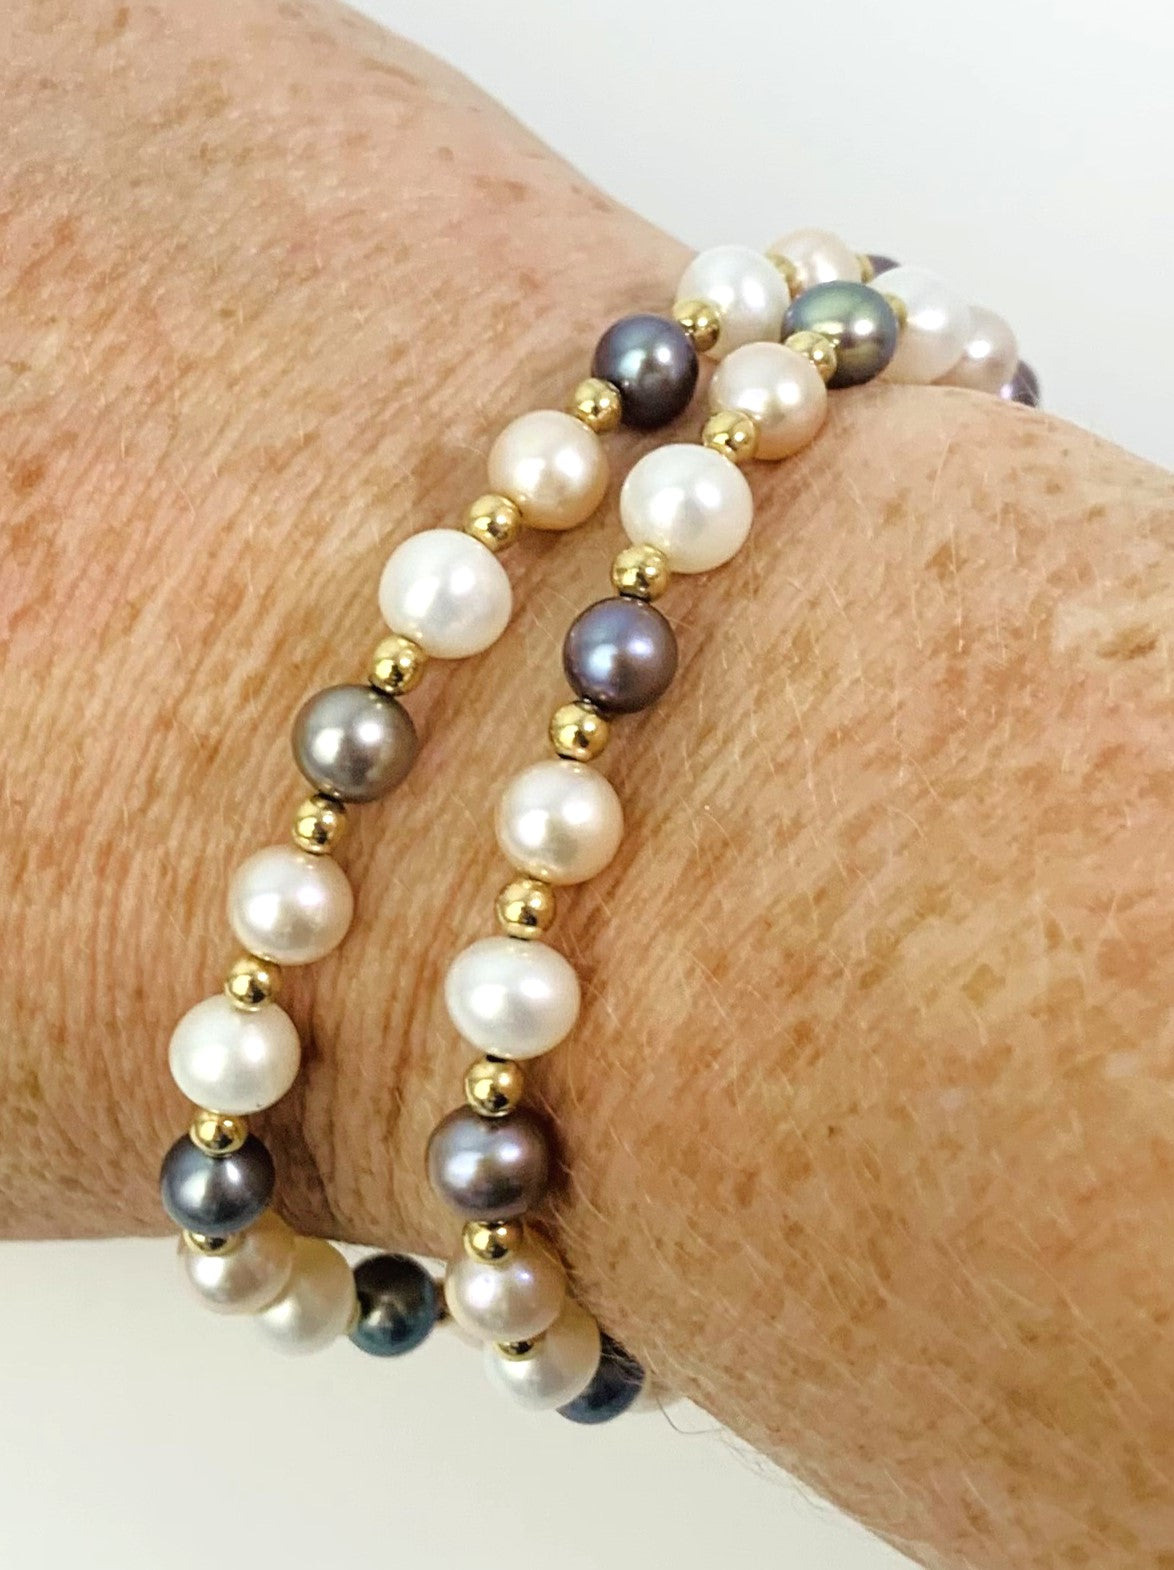 Clearance Sale! - 7.75" Double Row Pearl Bracelet in 14KY - BRC-020-DBLPRL14Y-MLTI-7.75